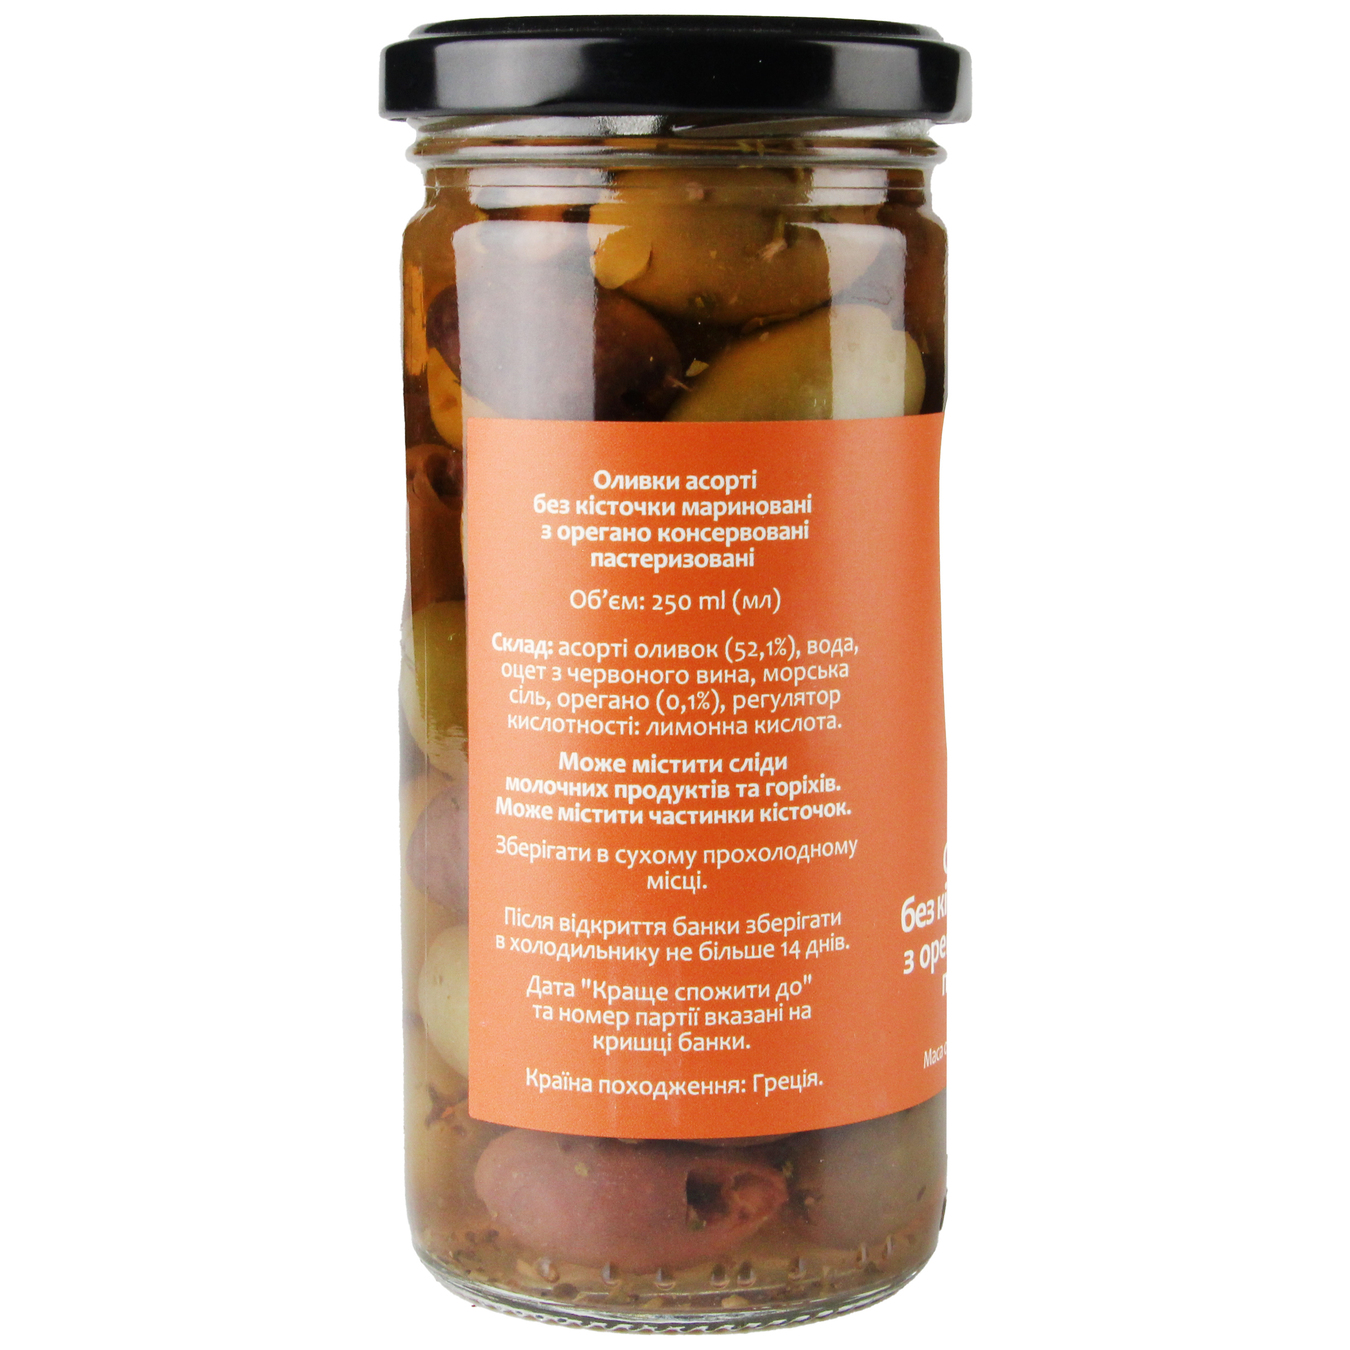 Food Basket Pitted Marinated With Oregano Pasteurized Olives 260g 2